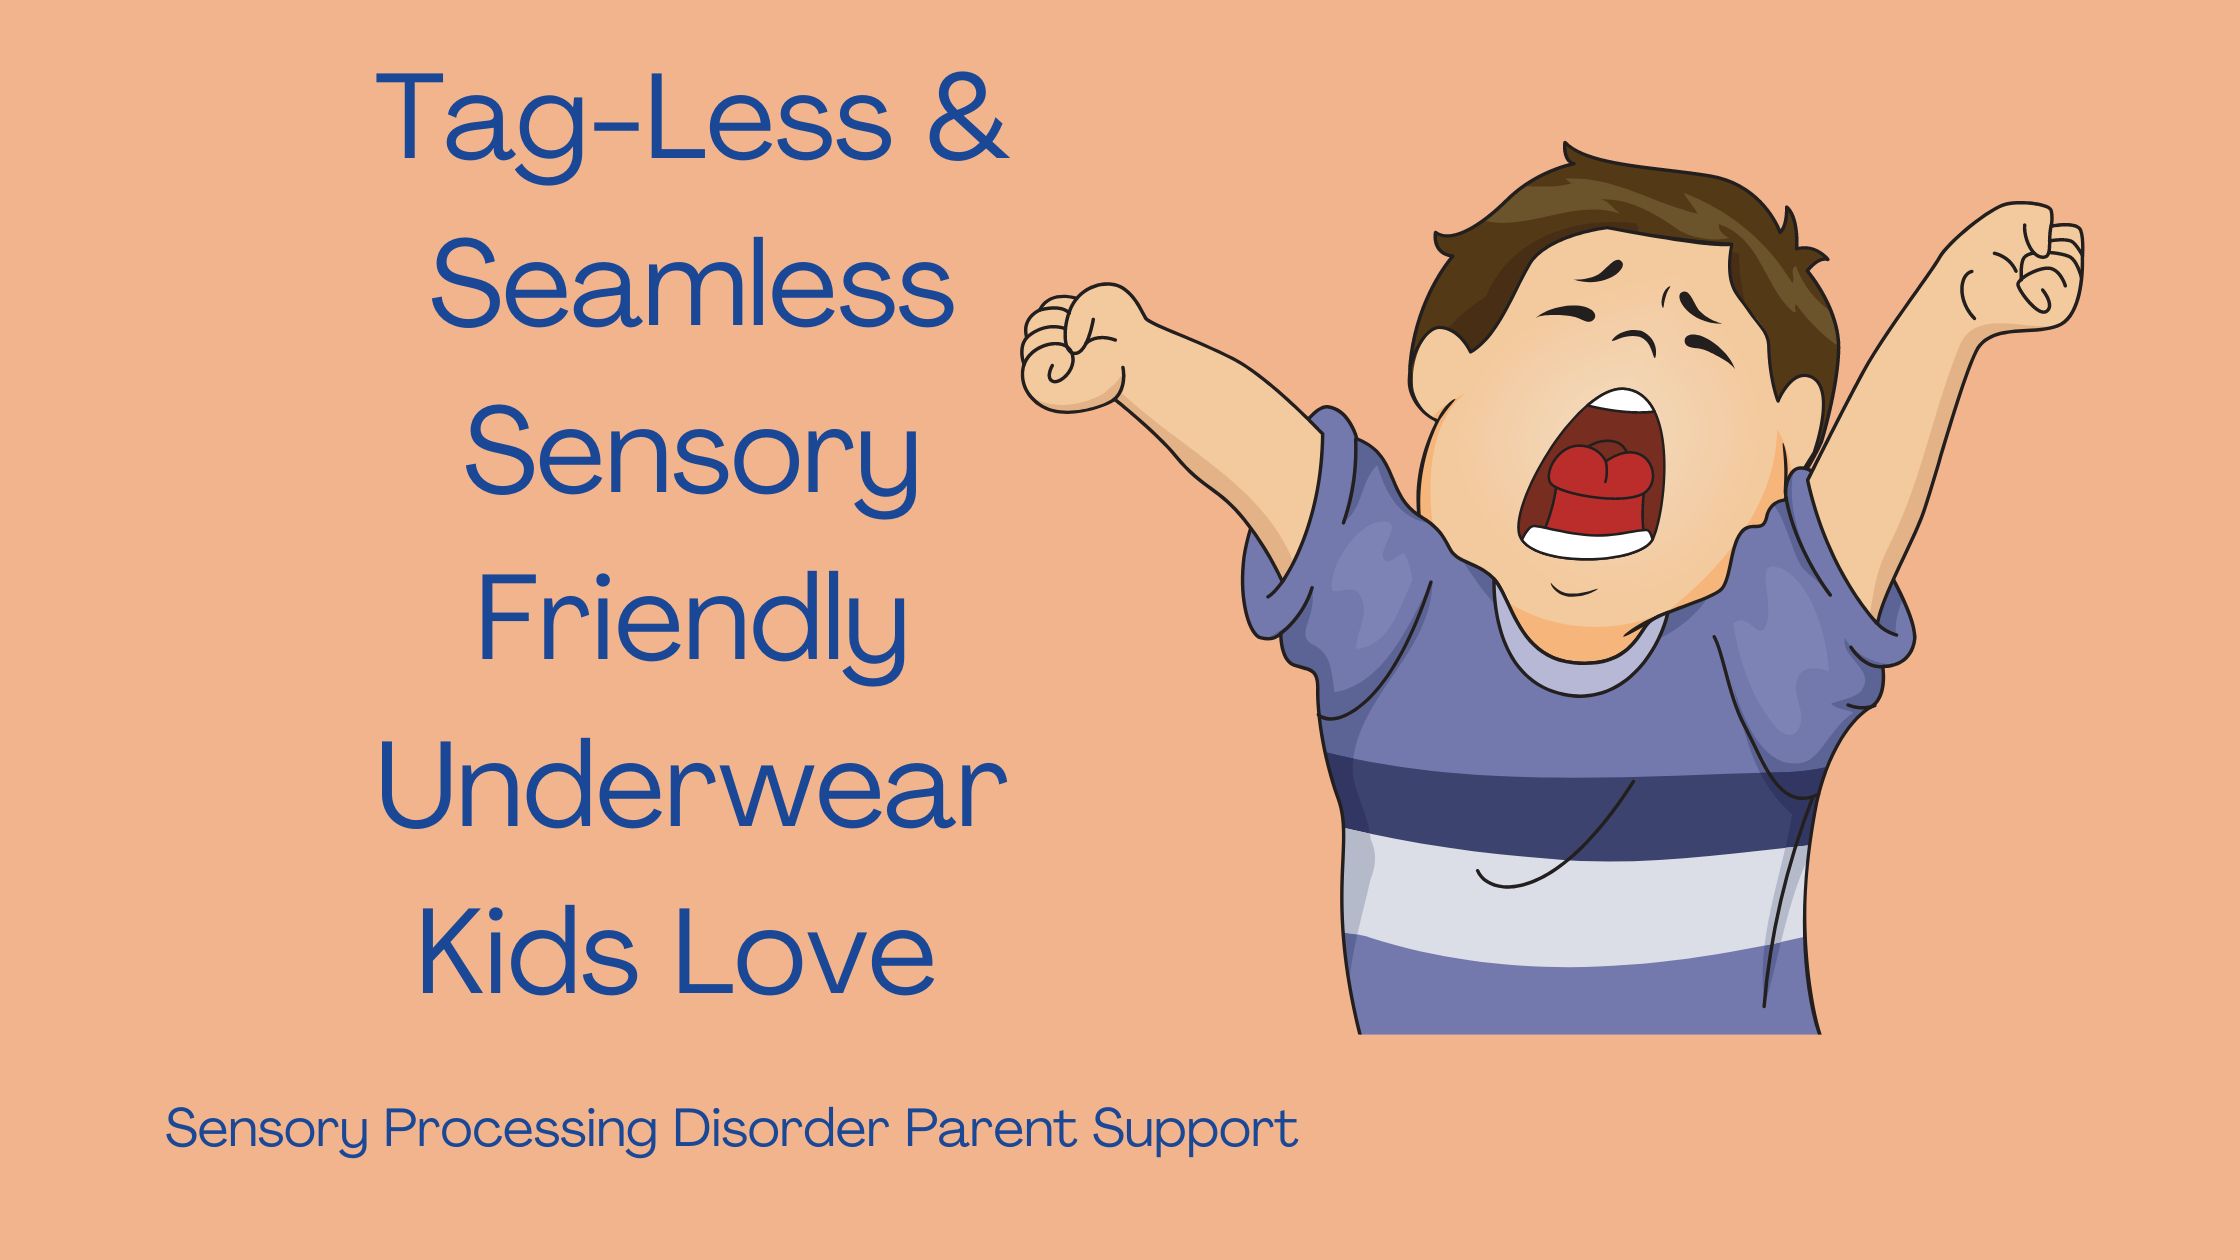 child with sensory processing disorder upset about wearing underwear Tag-Less & Seamless Sensory Friendly Underwear Kids Love